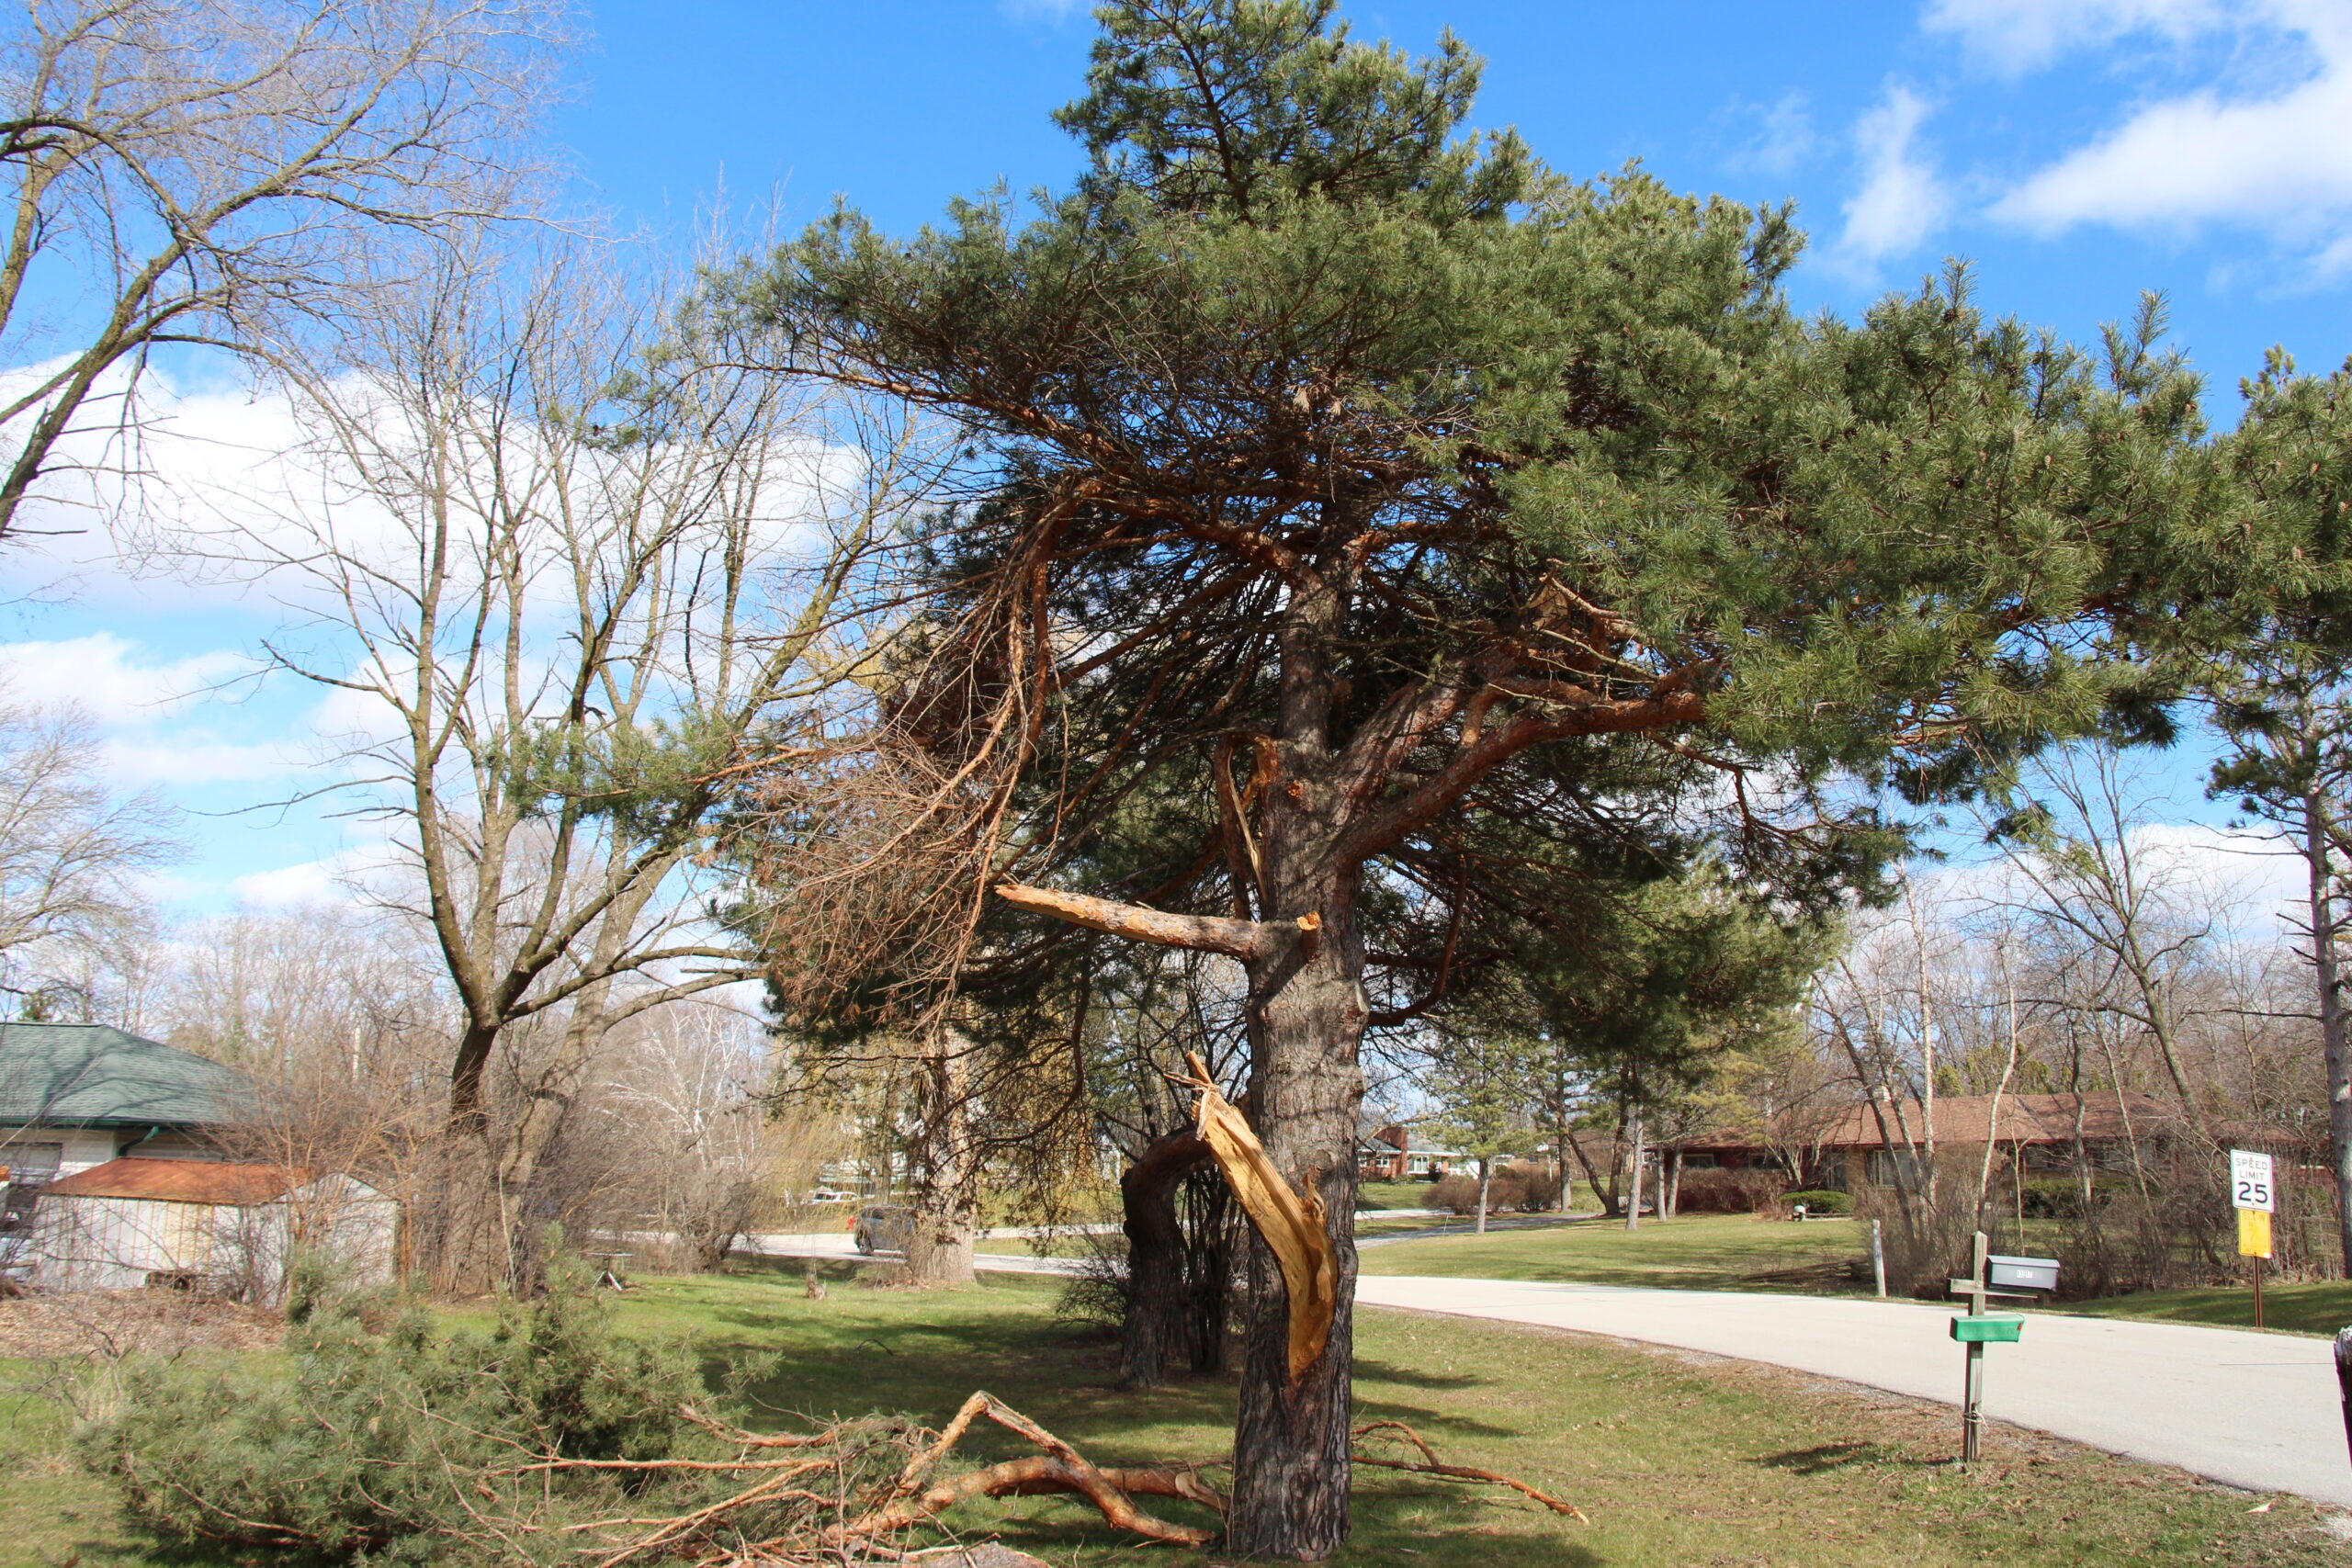 Encouraging Spring Inspections After Historic Winter Storm Damage